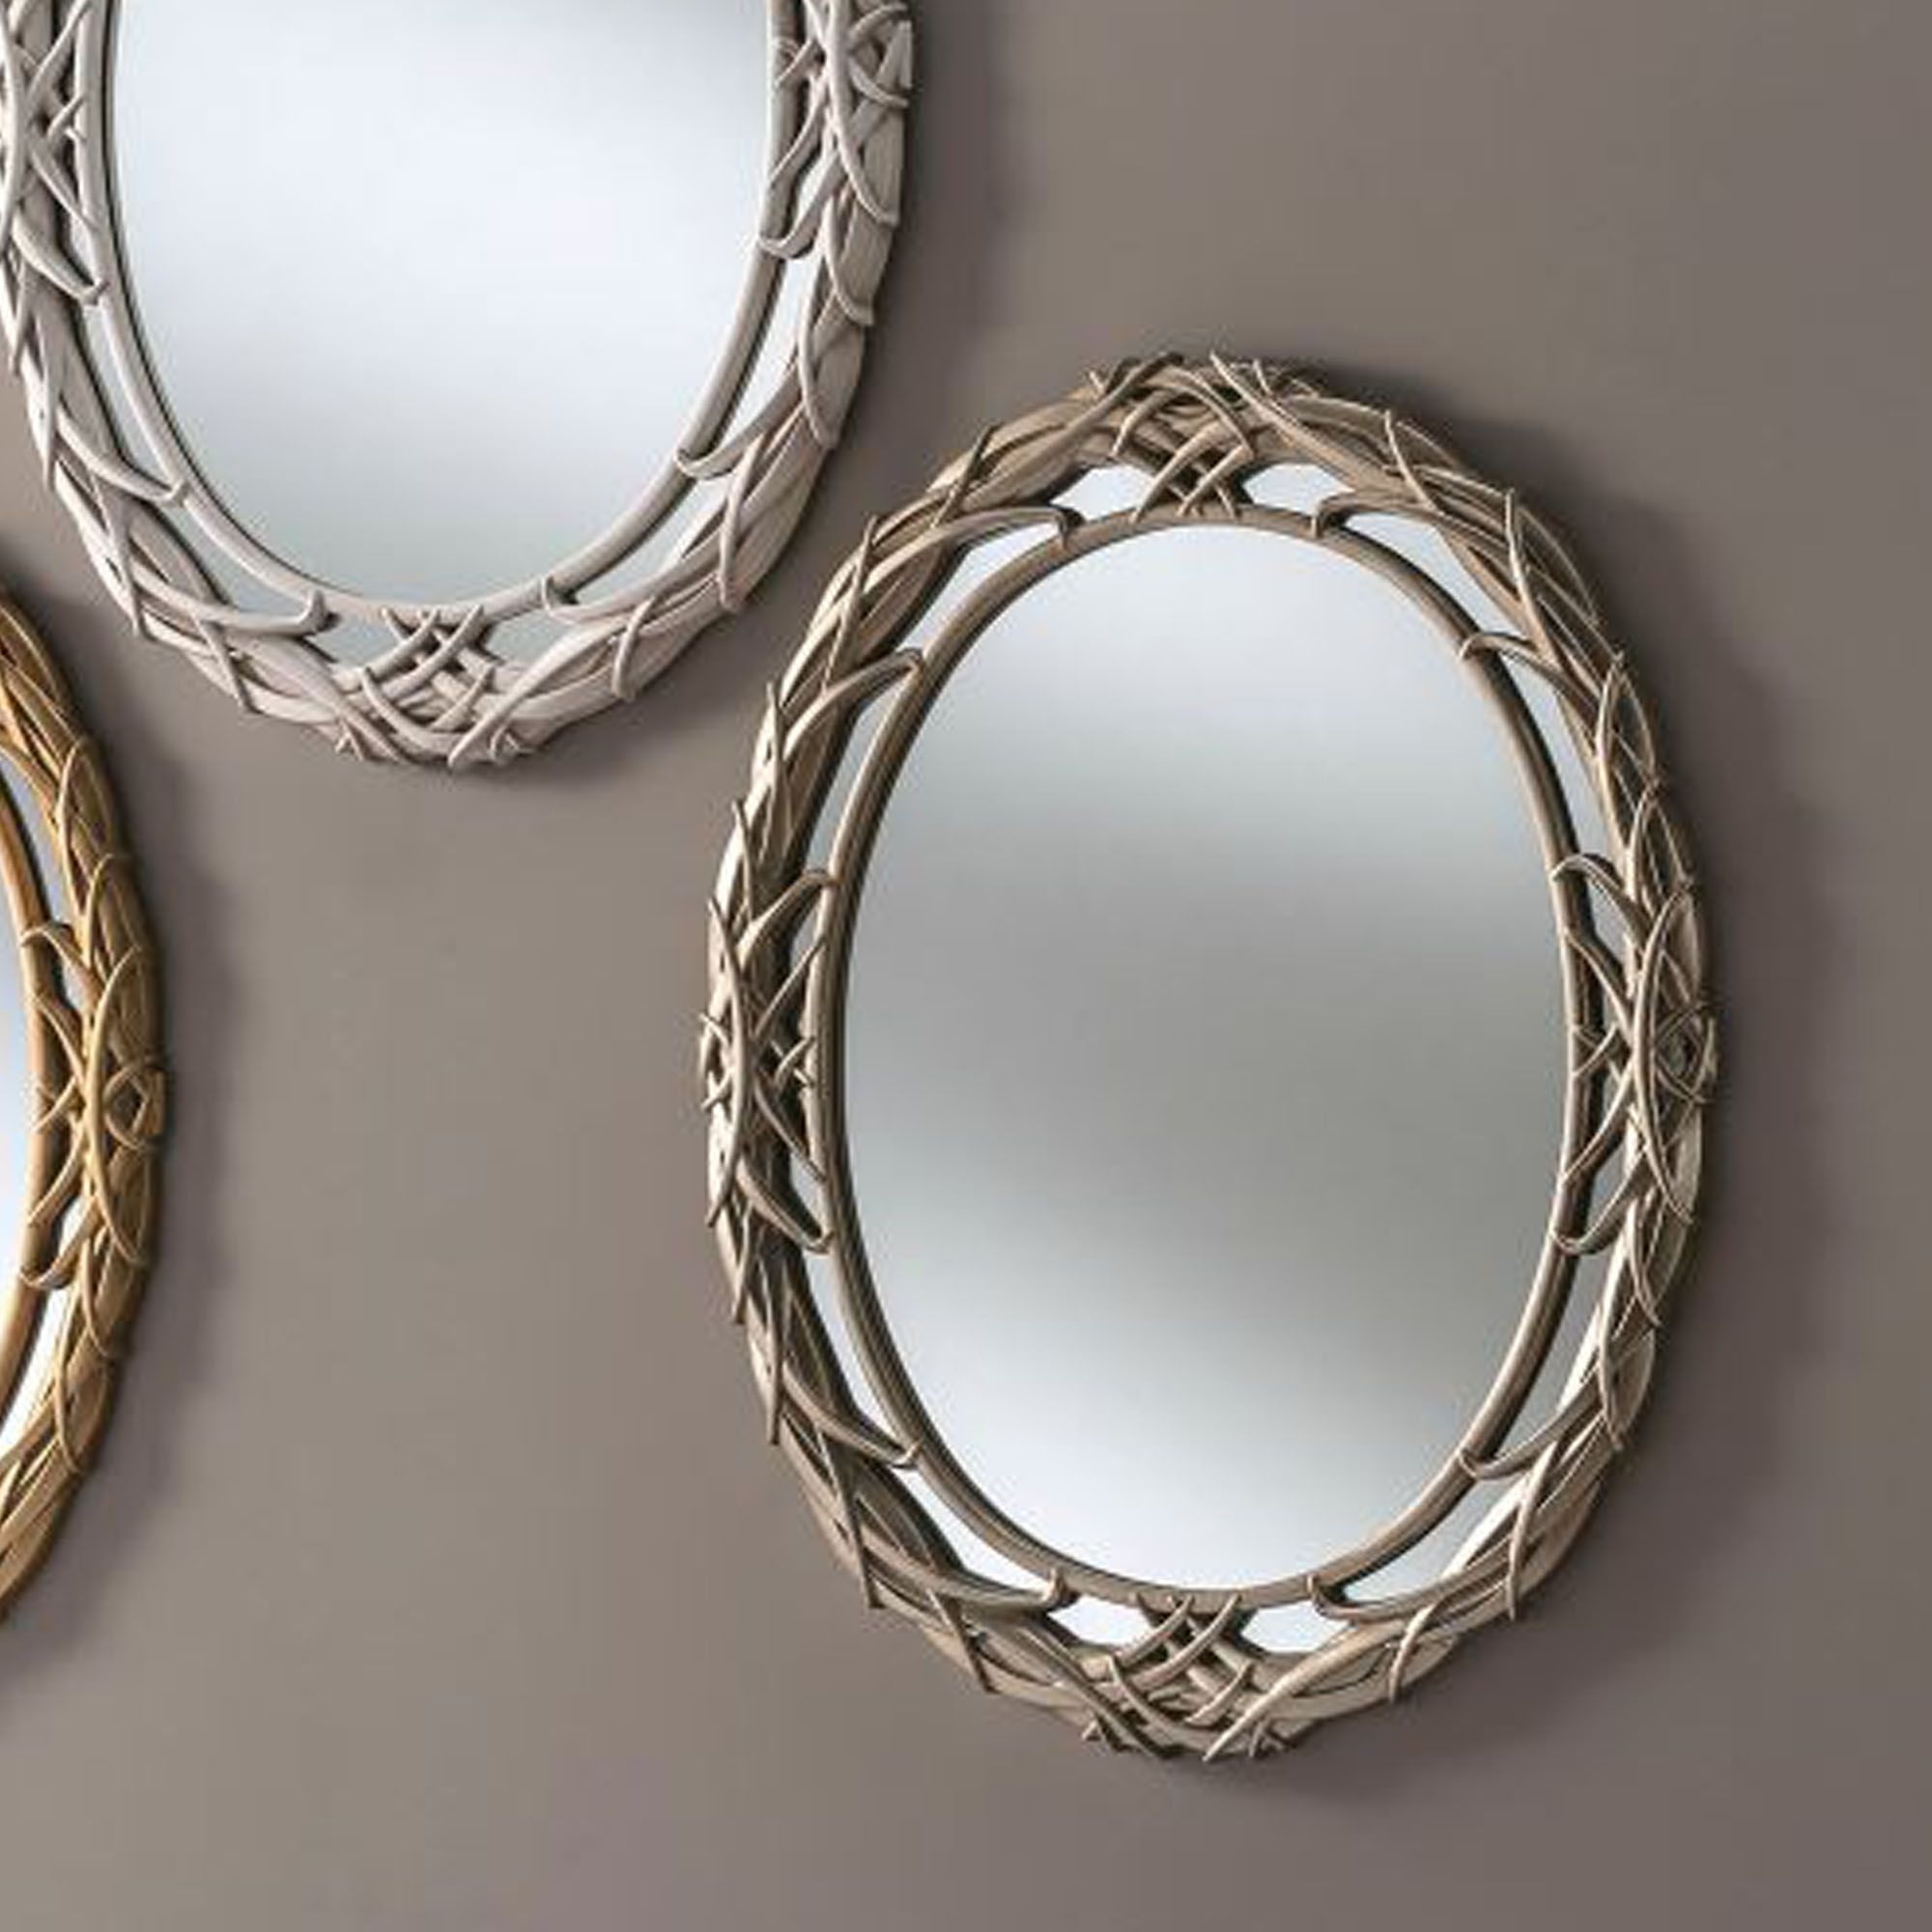 Oval Silver Decorative Wall Mirror | Mirrors | Homesdirect365 Within Nickel Framed Oval Wall Mirrors (View 6 of 15)